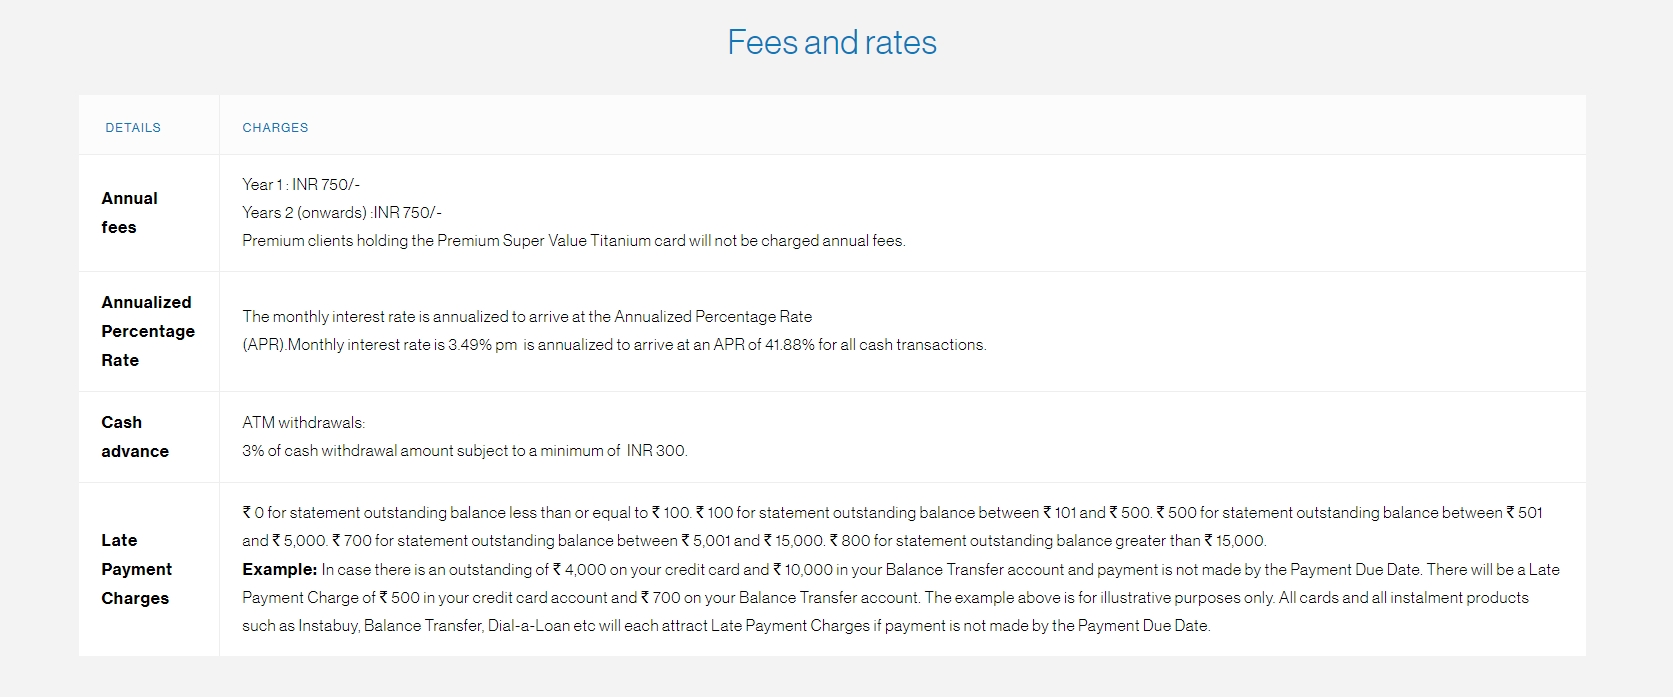 fees-charges-standard-chartered-super-value-titanium-credit-card